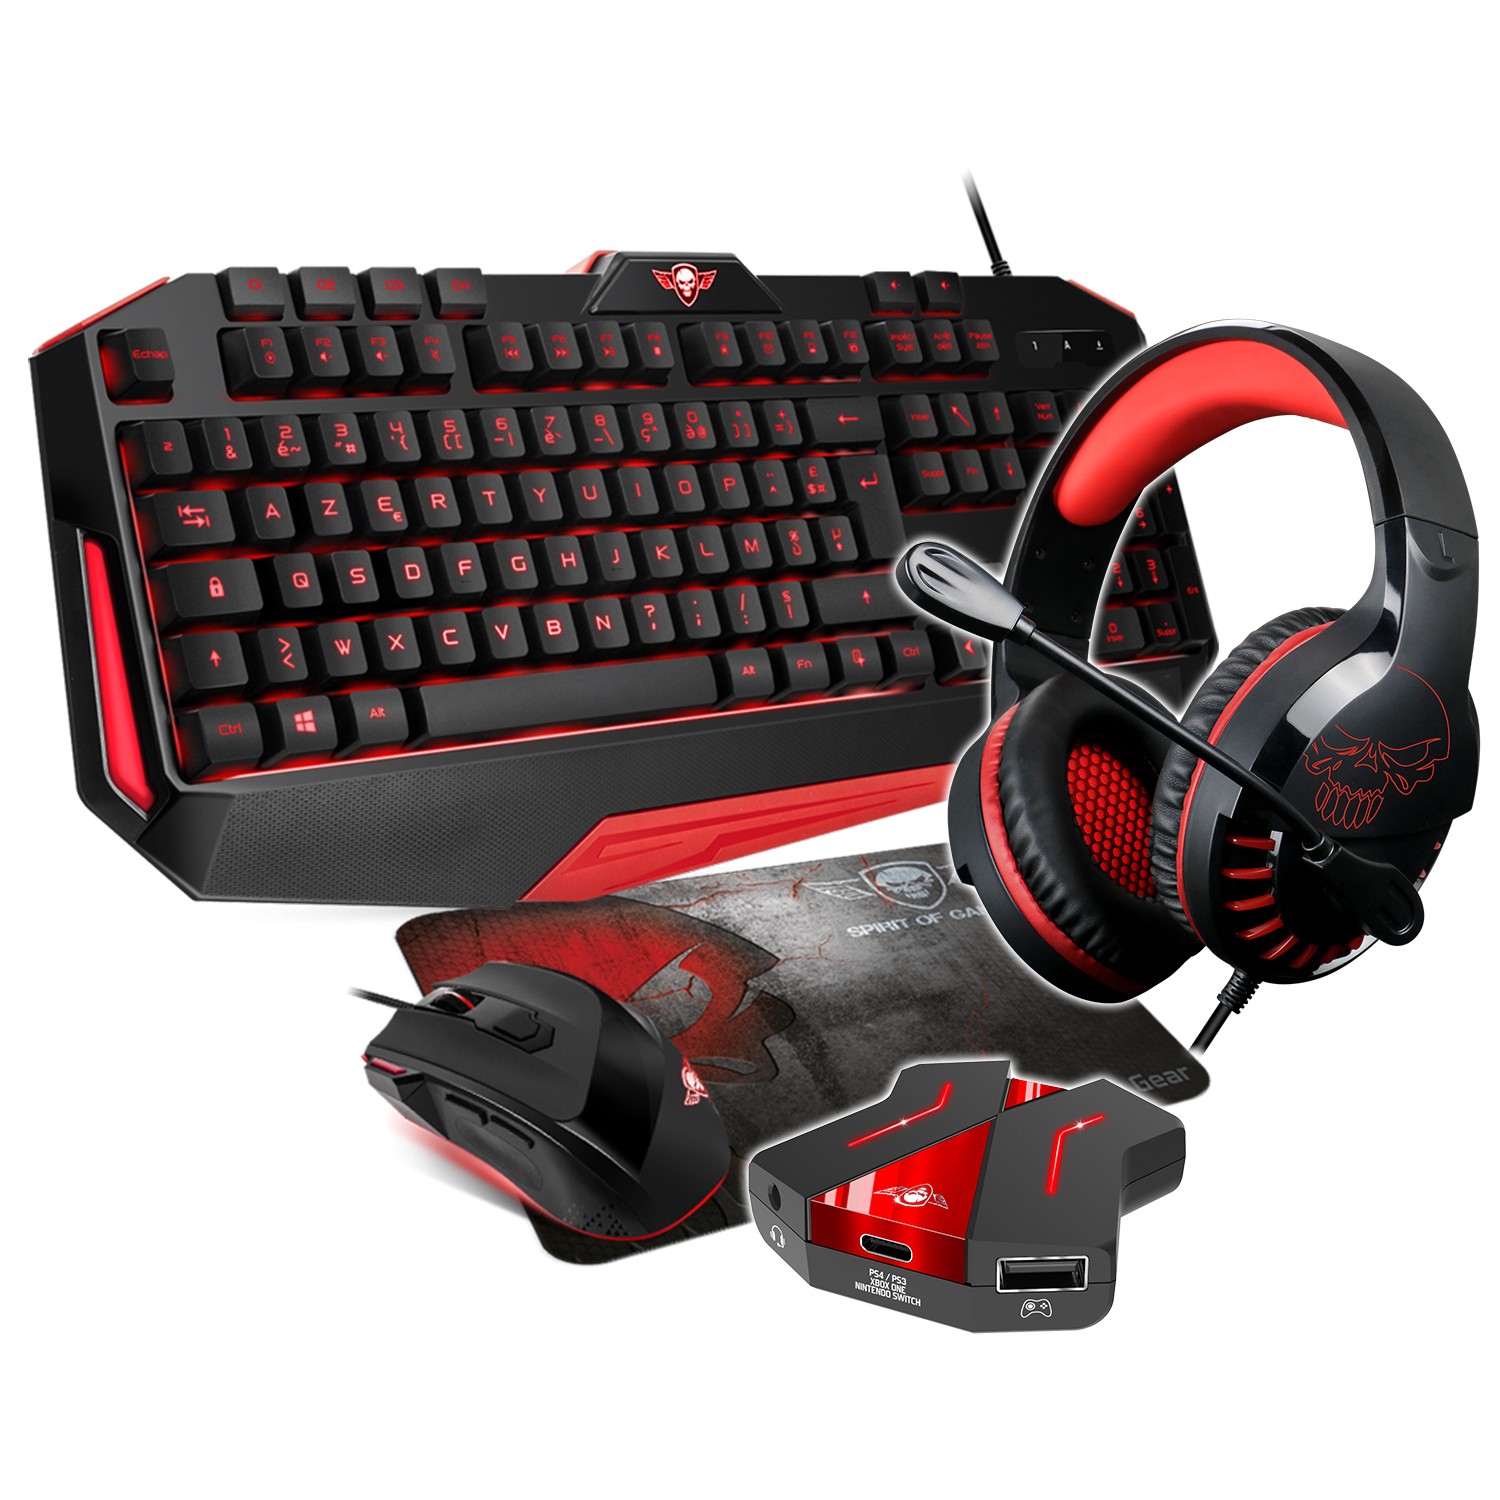 Pack Clavier Souris Casque Tapis Convertisseur Lampe Gaming SWITCH PC PS3  PS4 X 3666388007382